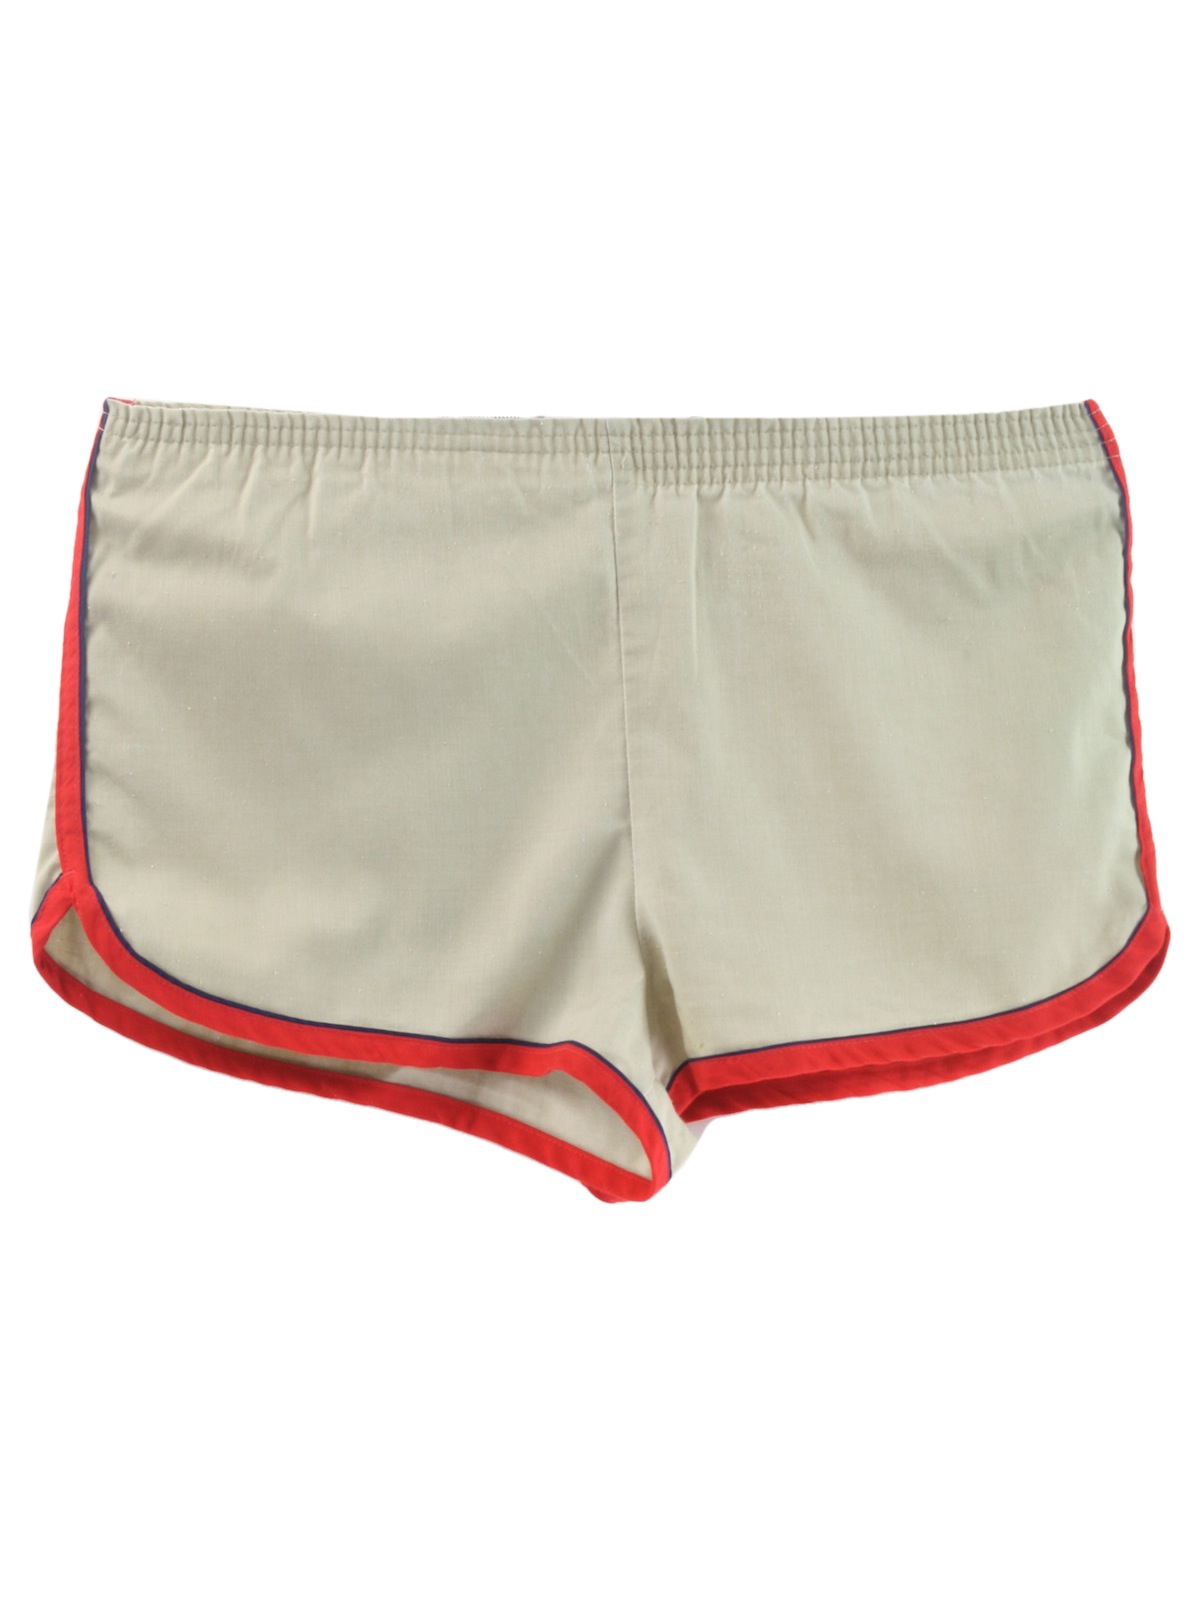 Seventies Kmart Shorts: 70s -Kmart- Mens tan background with red and ...